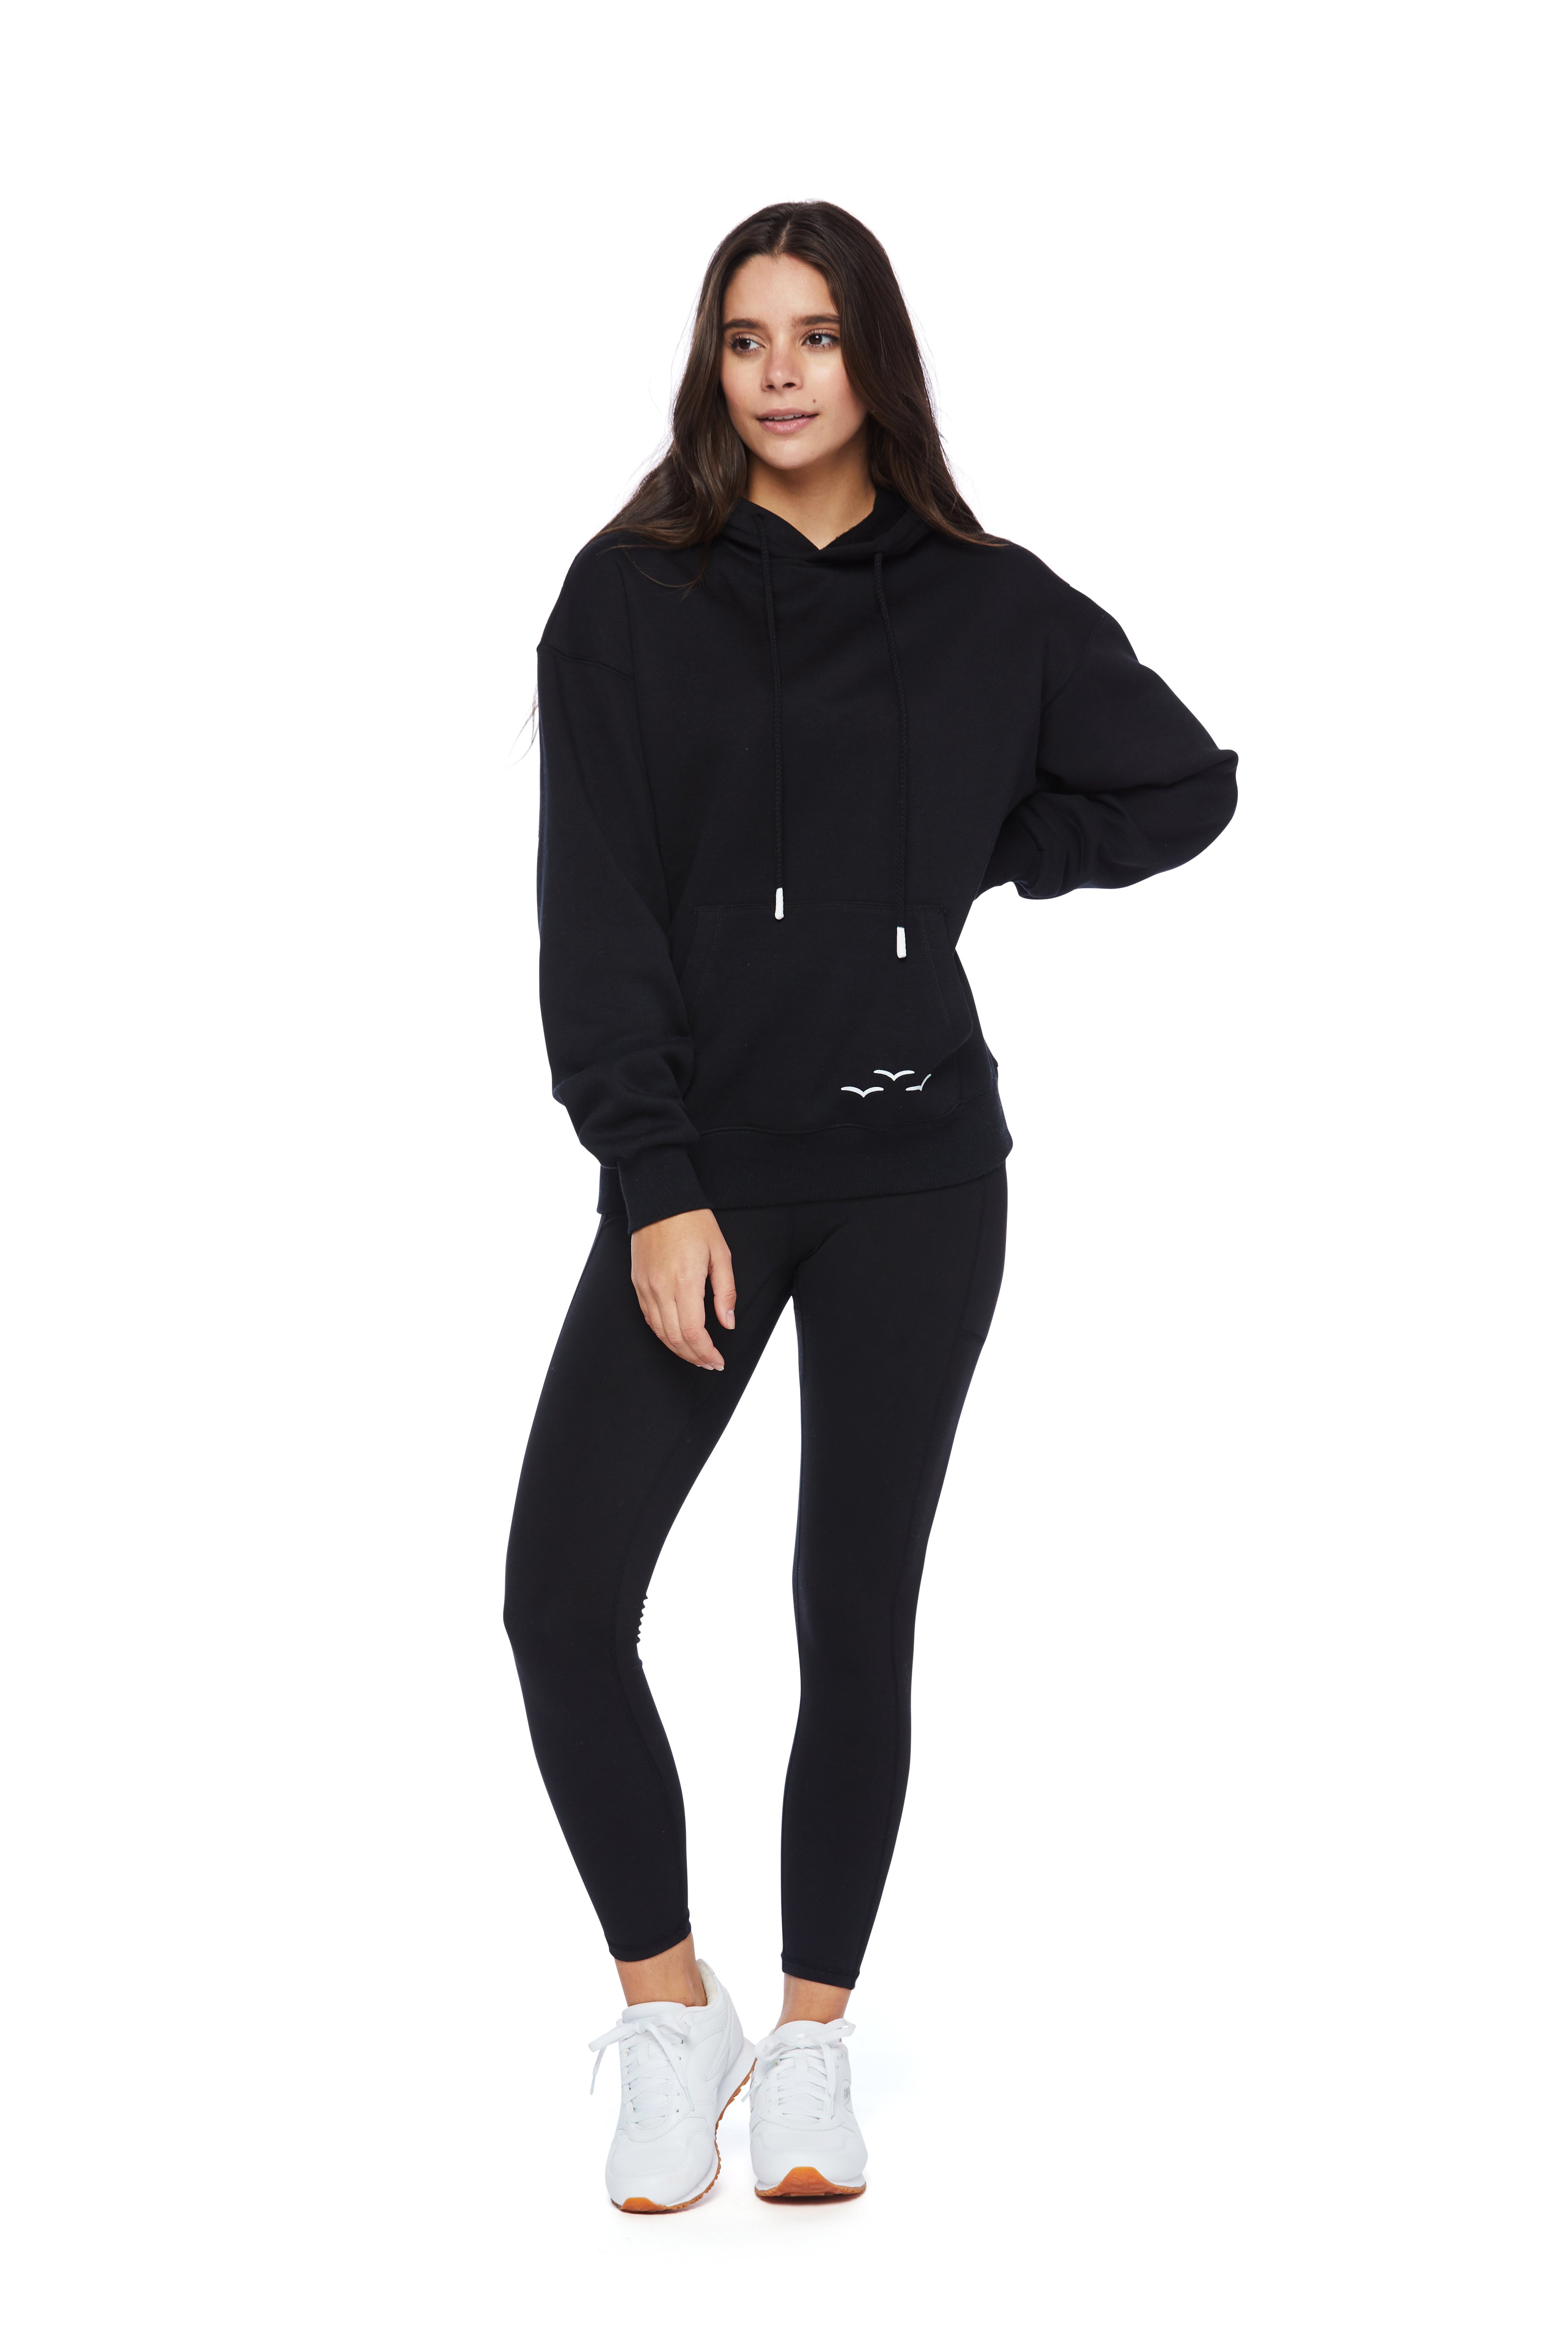 Lazypants Women's Sueded Pullover